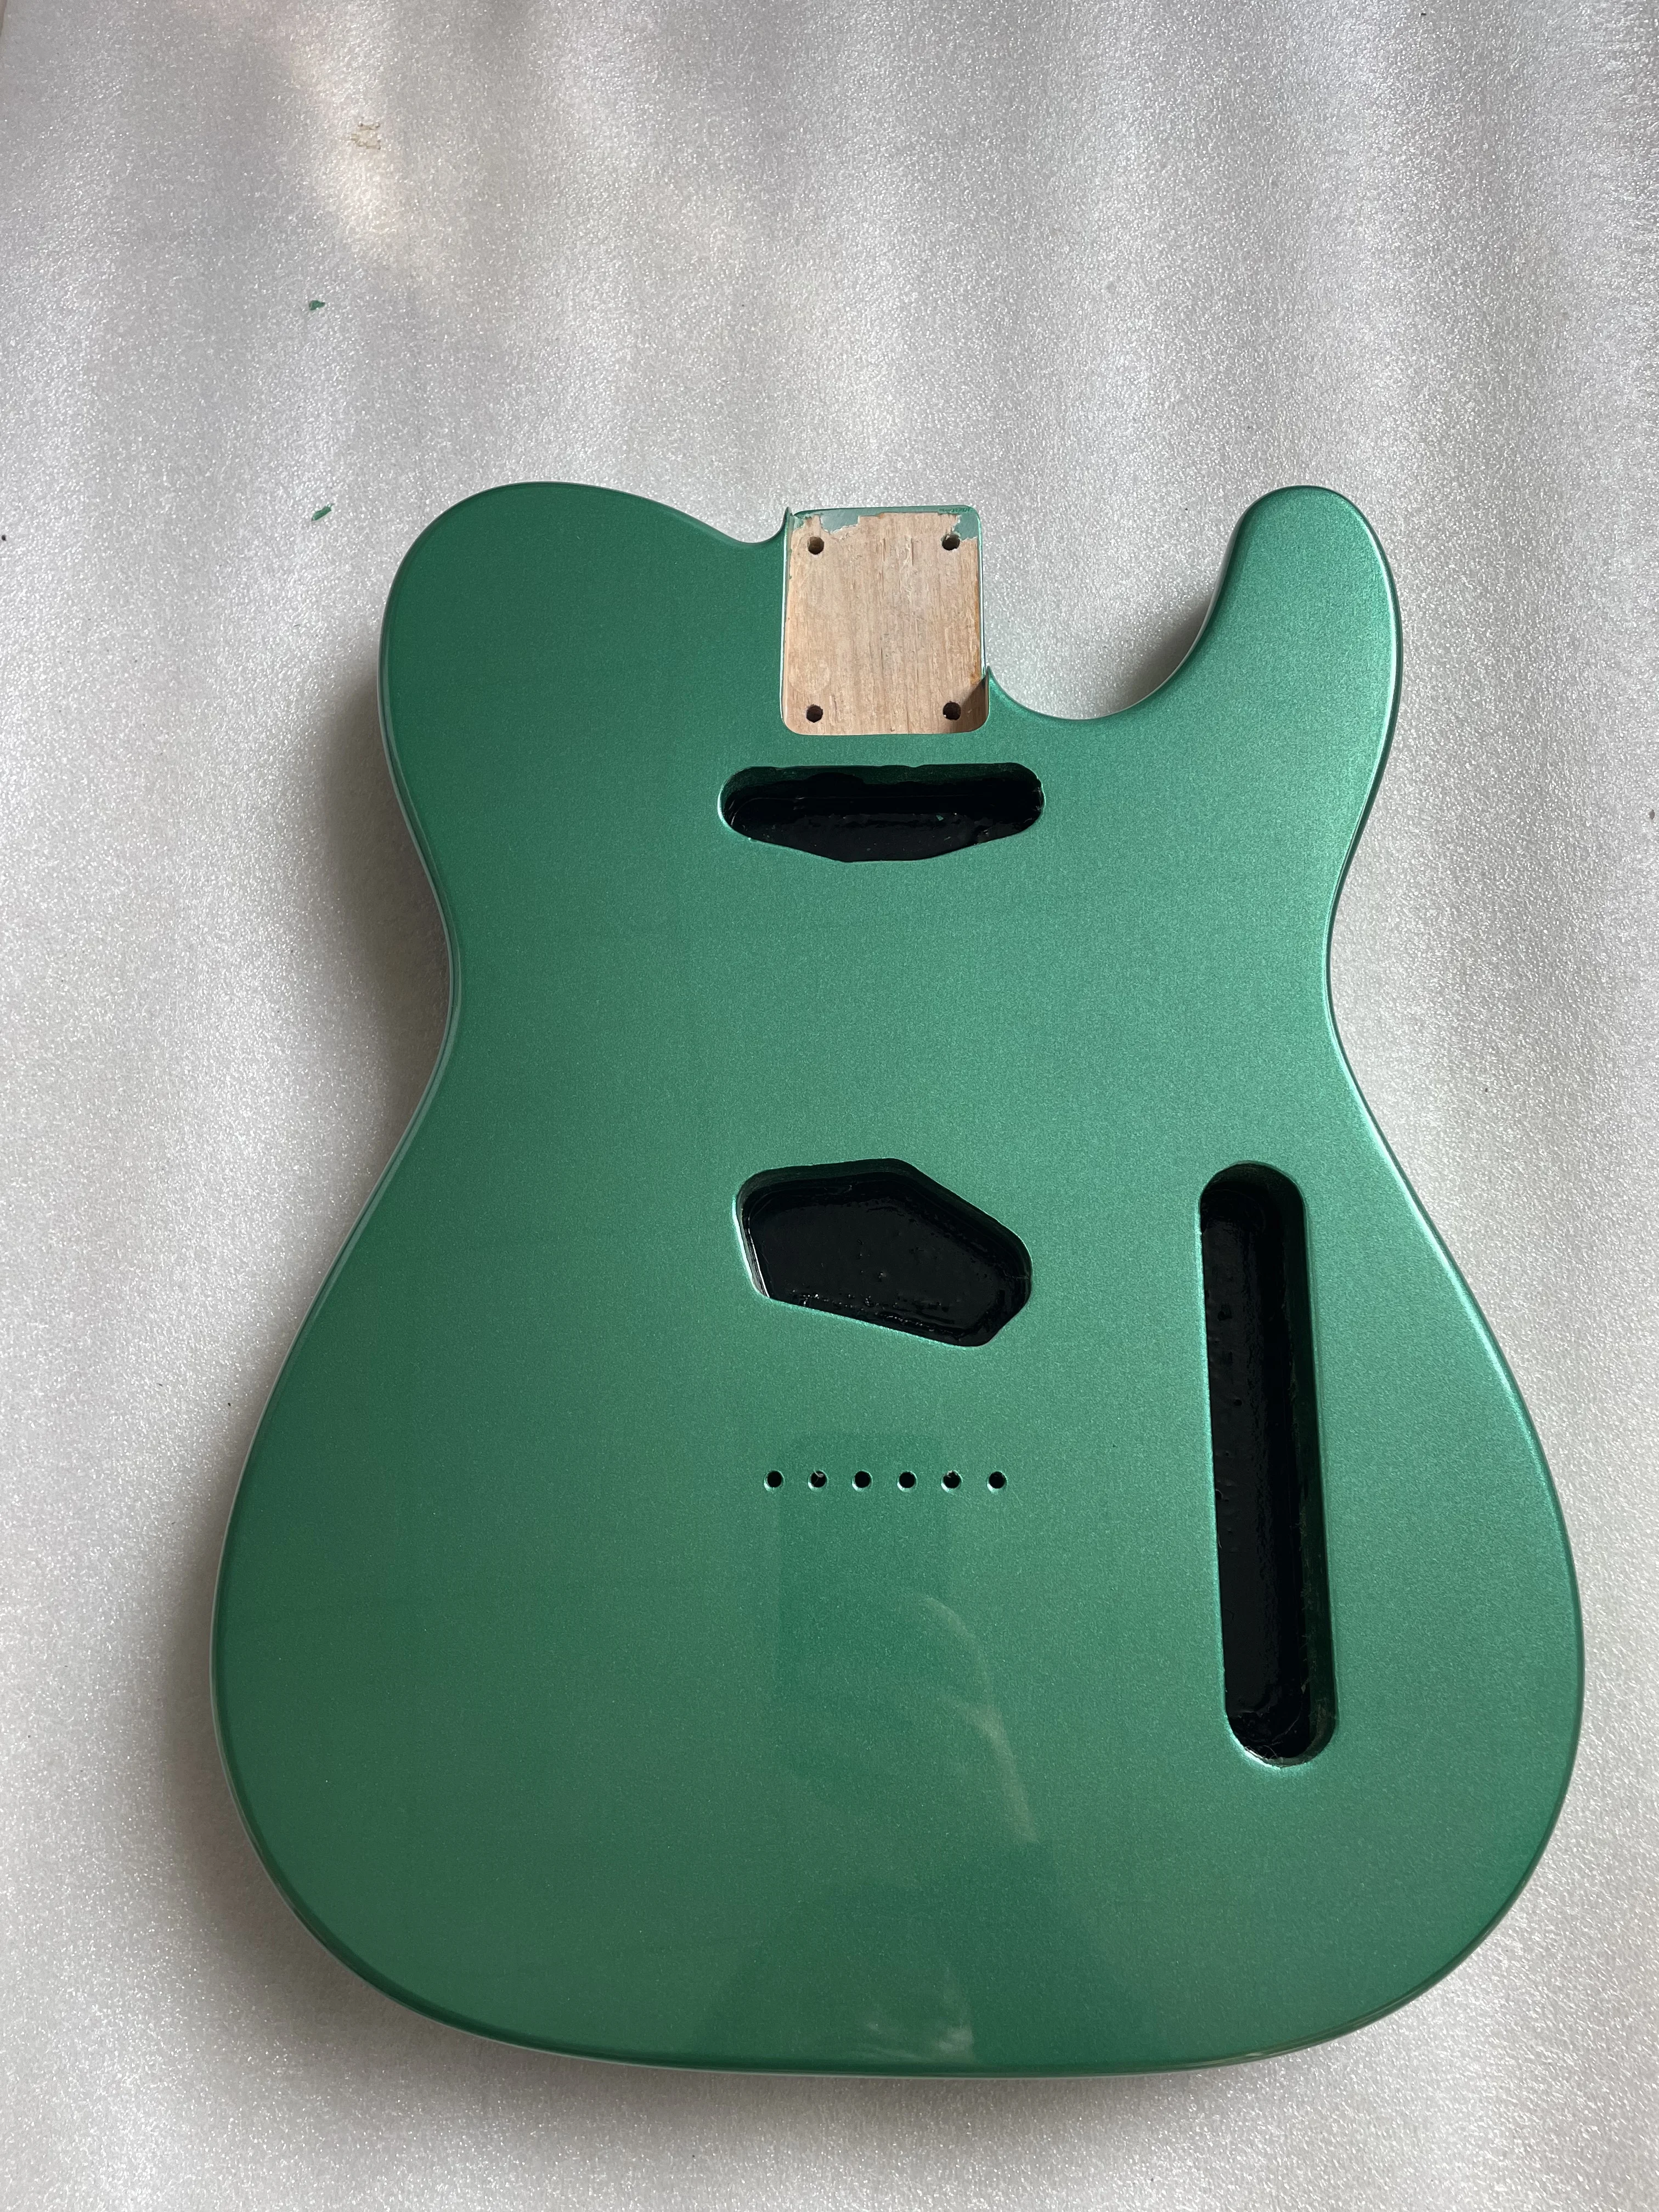 

New DIY Upgrade T L Guitar Body Alder Wood Aged Wooden Barrel Gloss Metal Green Piano Baking Paint 5.55cm Width High Quality